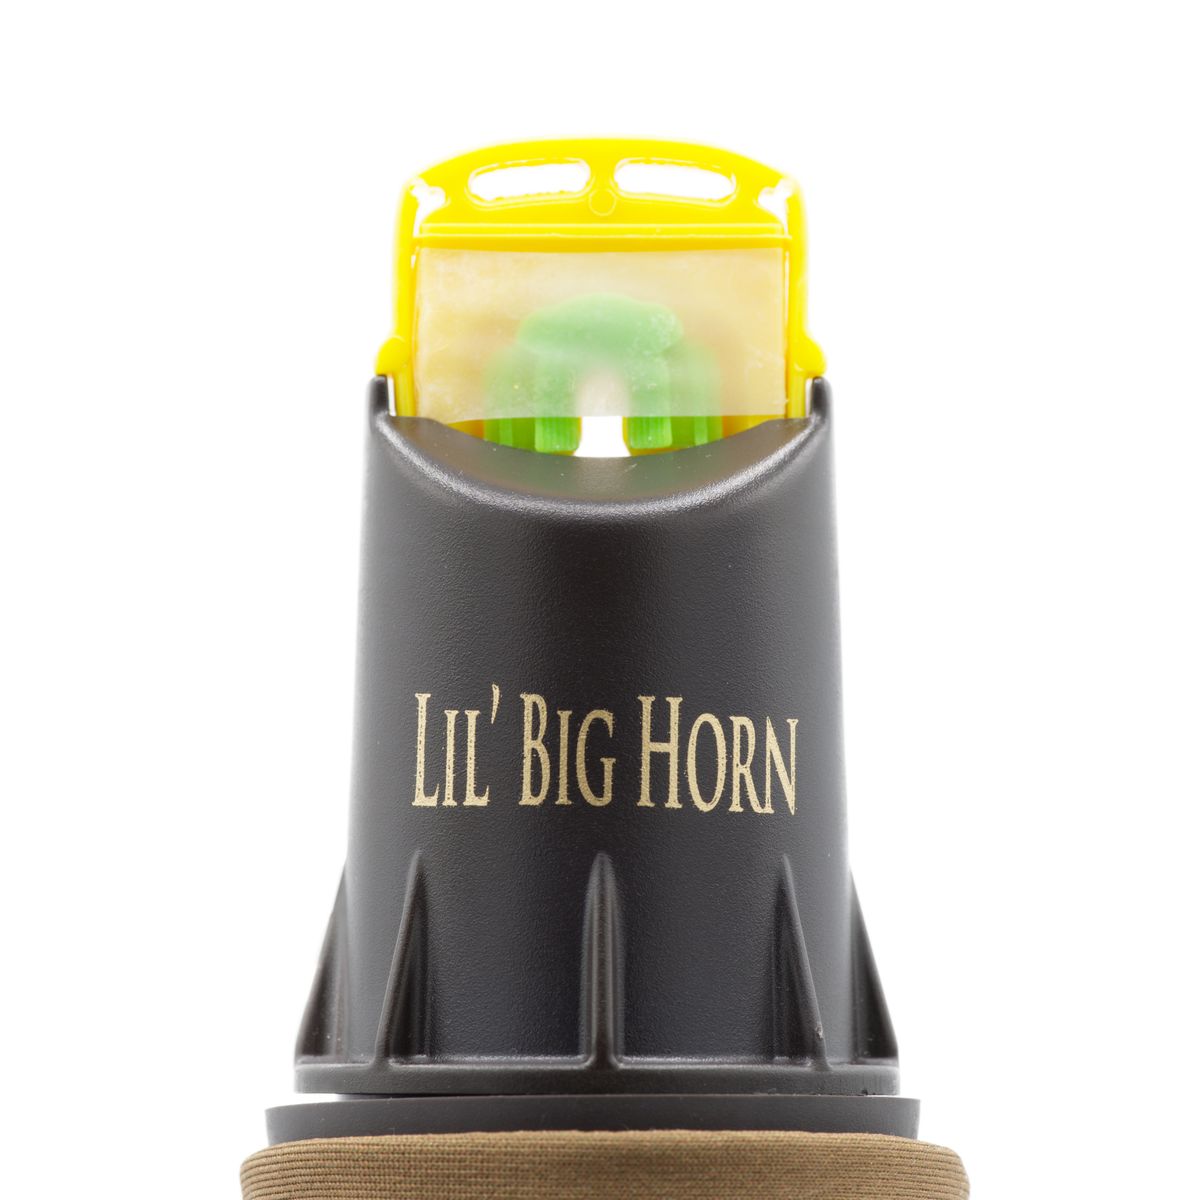 A close-up image of the external mouthpiece used with the Lil’ Big Horn Elk Bugle from Liberty Game Calls.